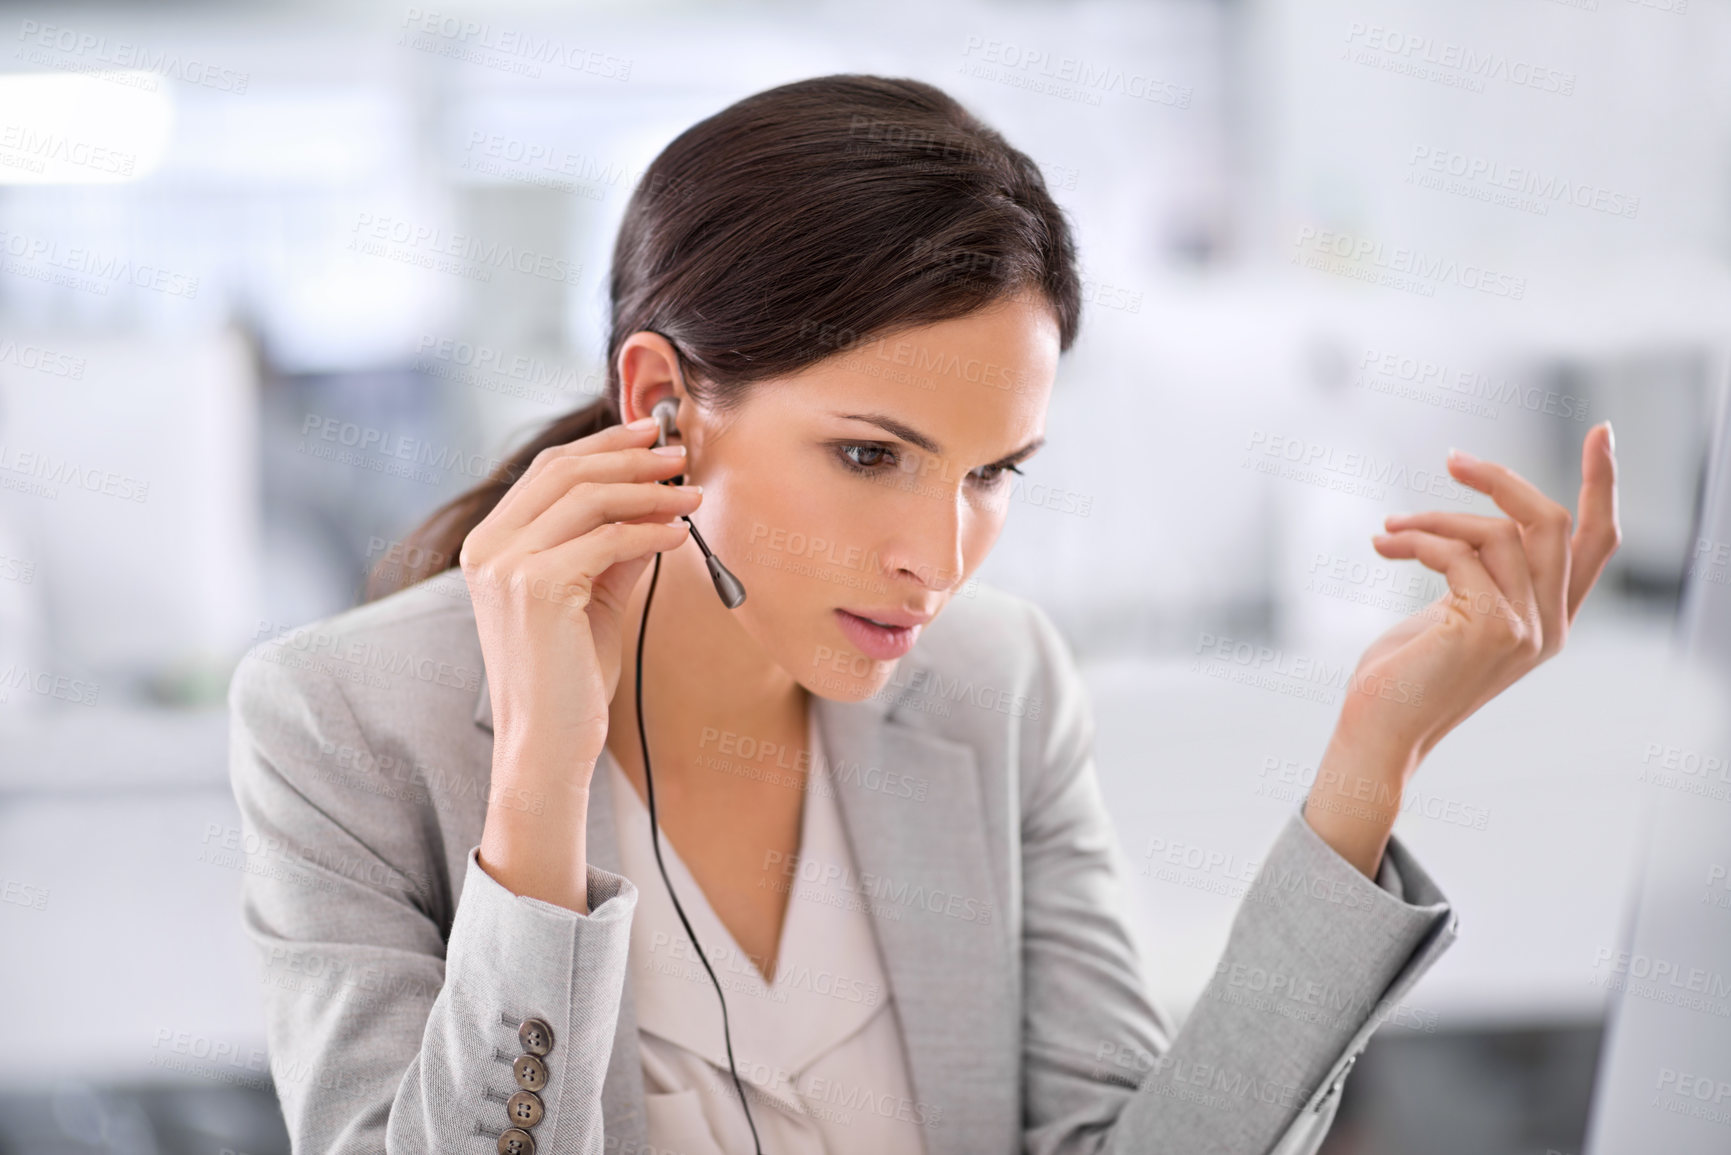 Buy stock photo Call center agent helping a client via phone call to give them good customer service and care. Professional consultant employee at contact support listening to a person via her headset at work desk